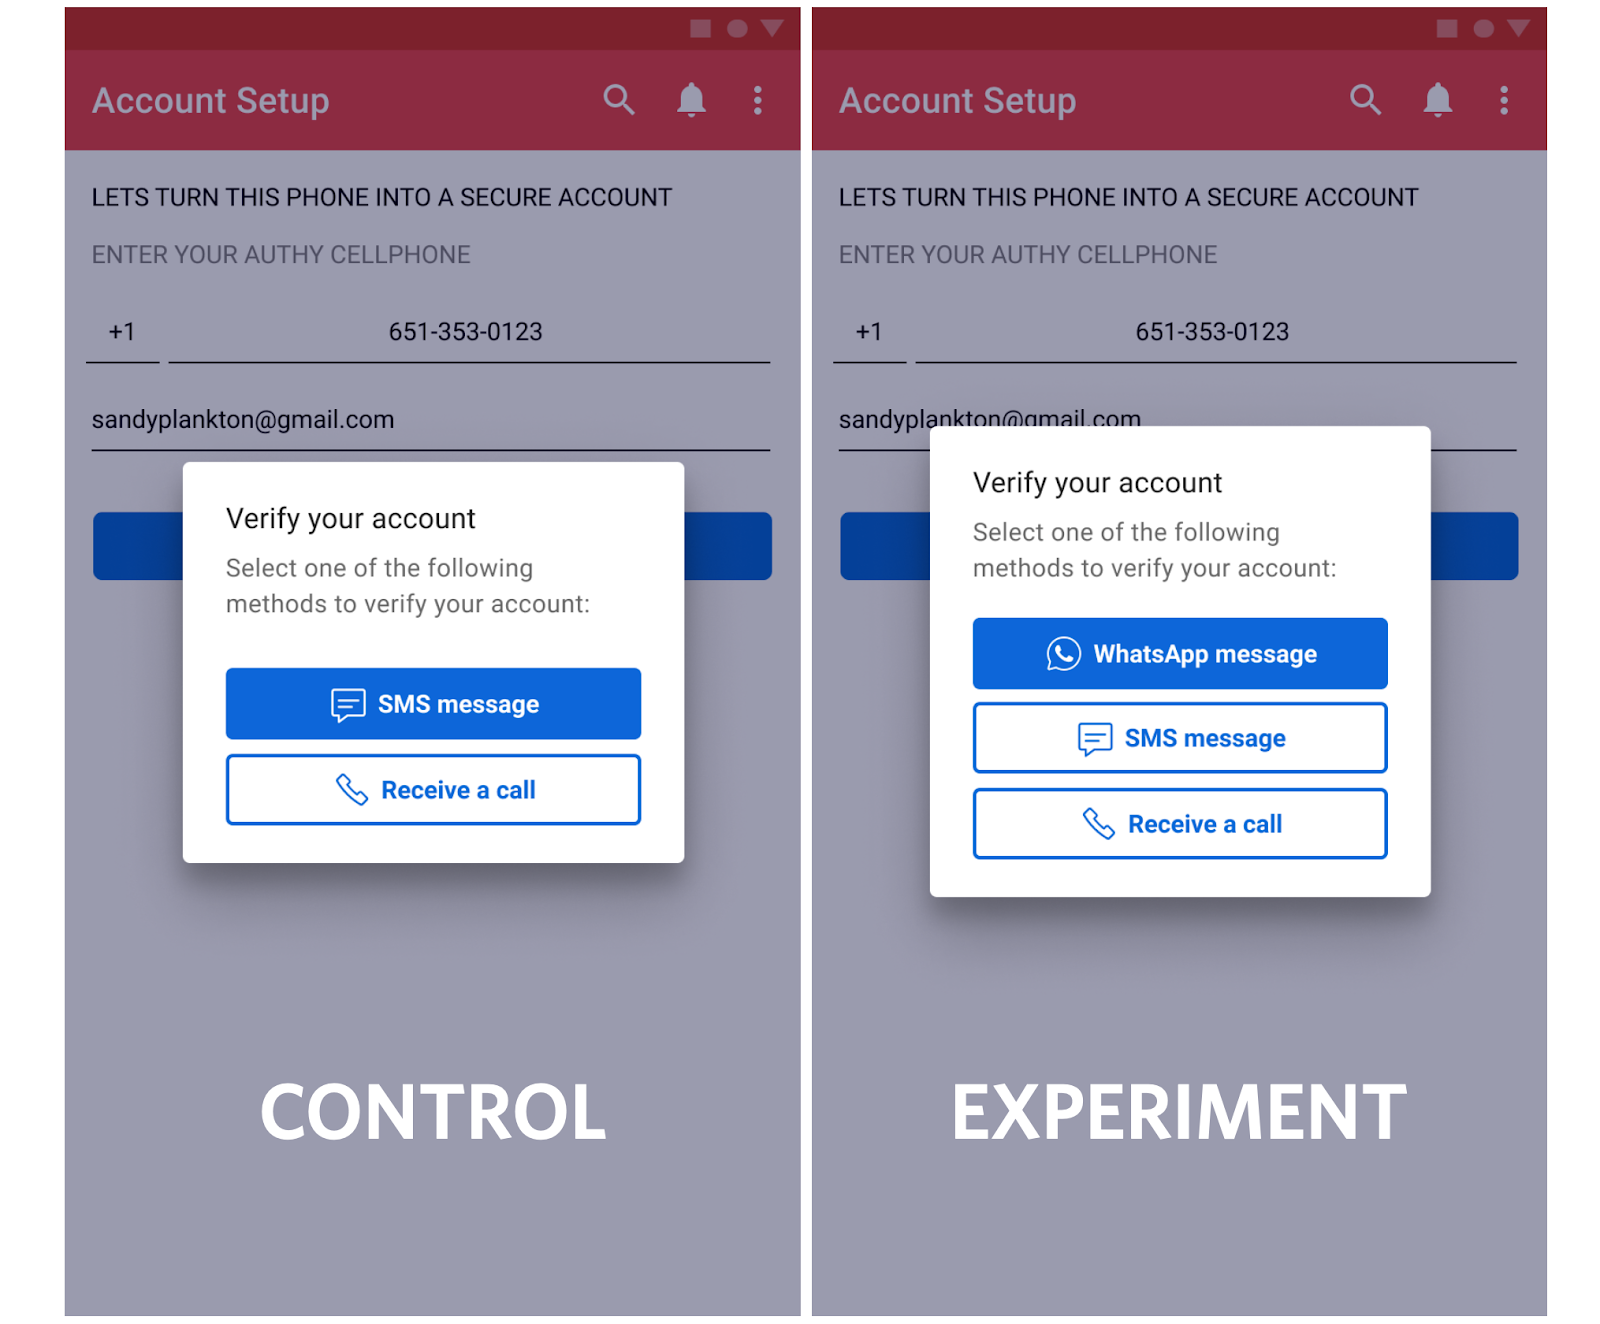 experiment screenshot showing before and after - after has an option to send a whatsapp message